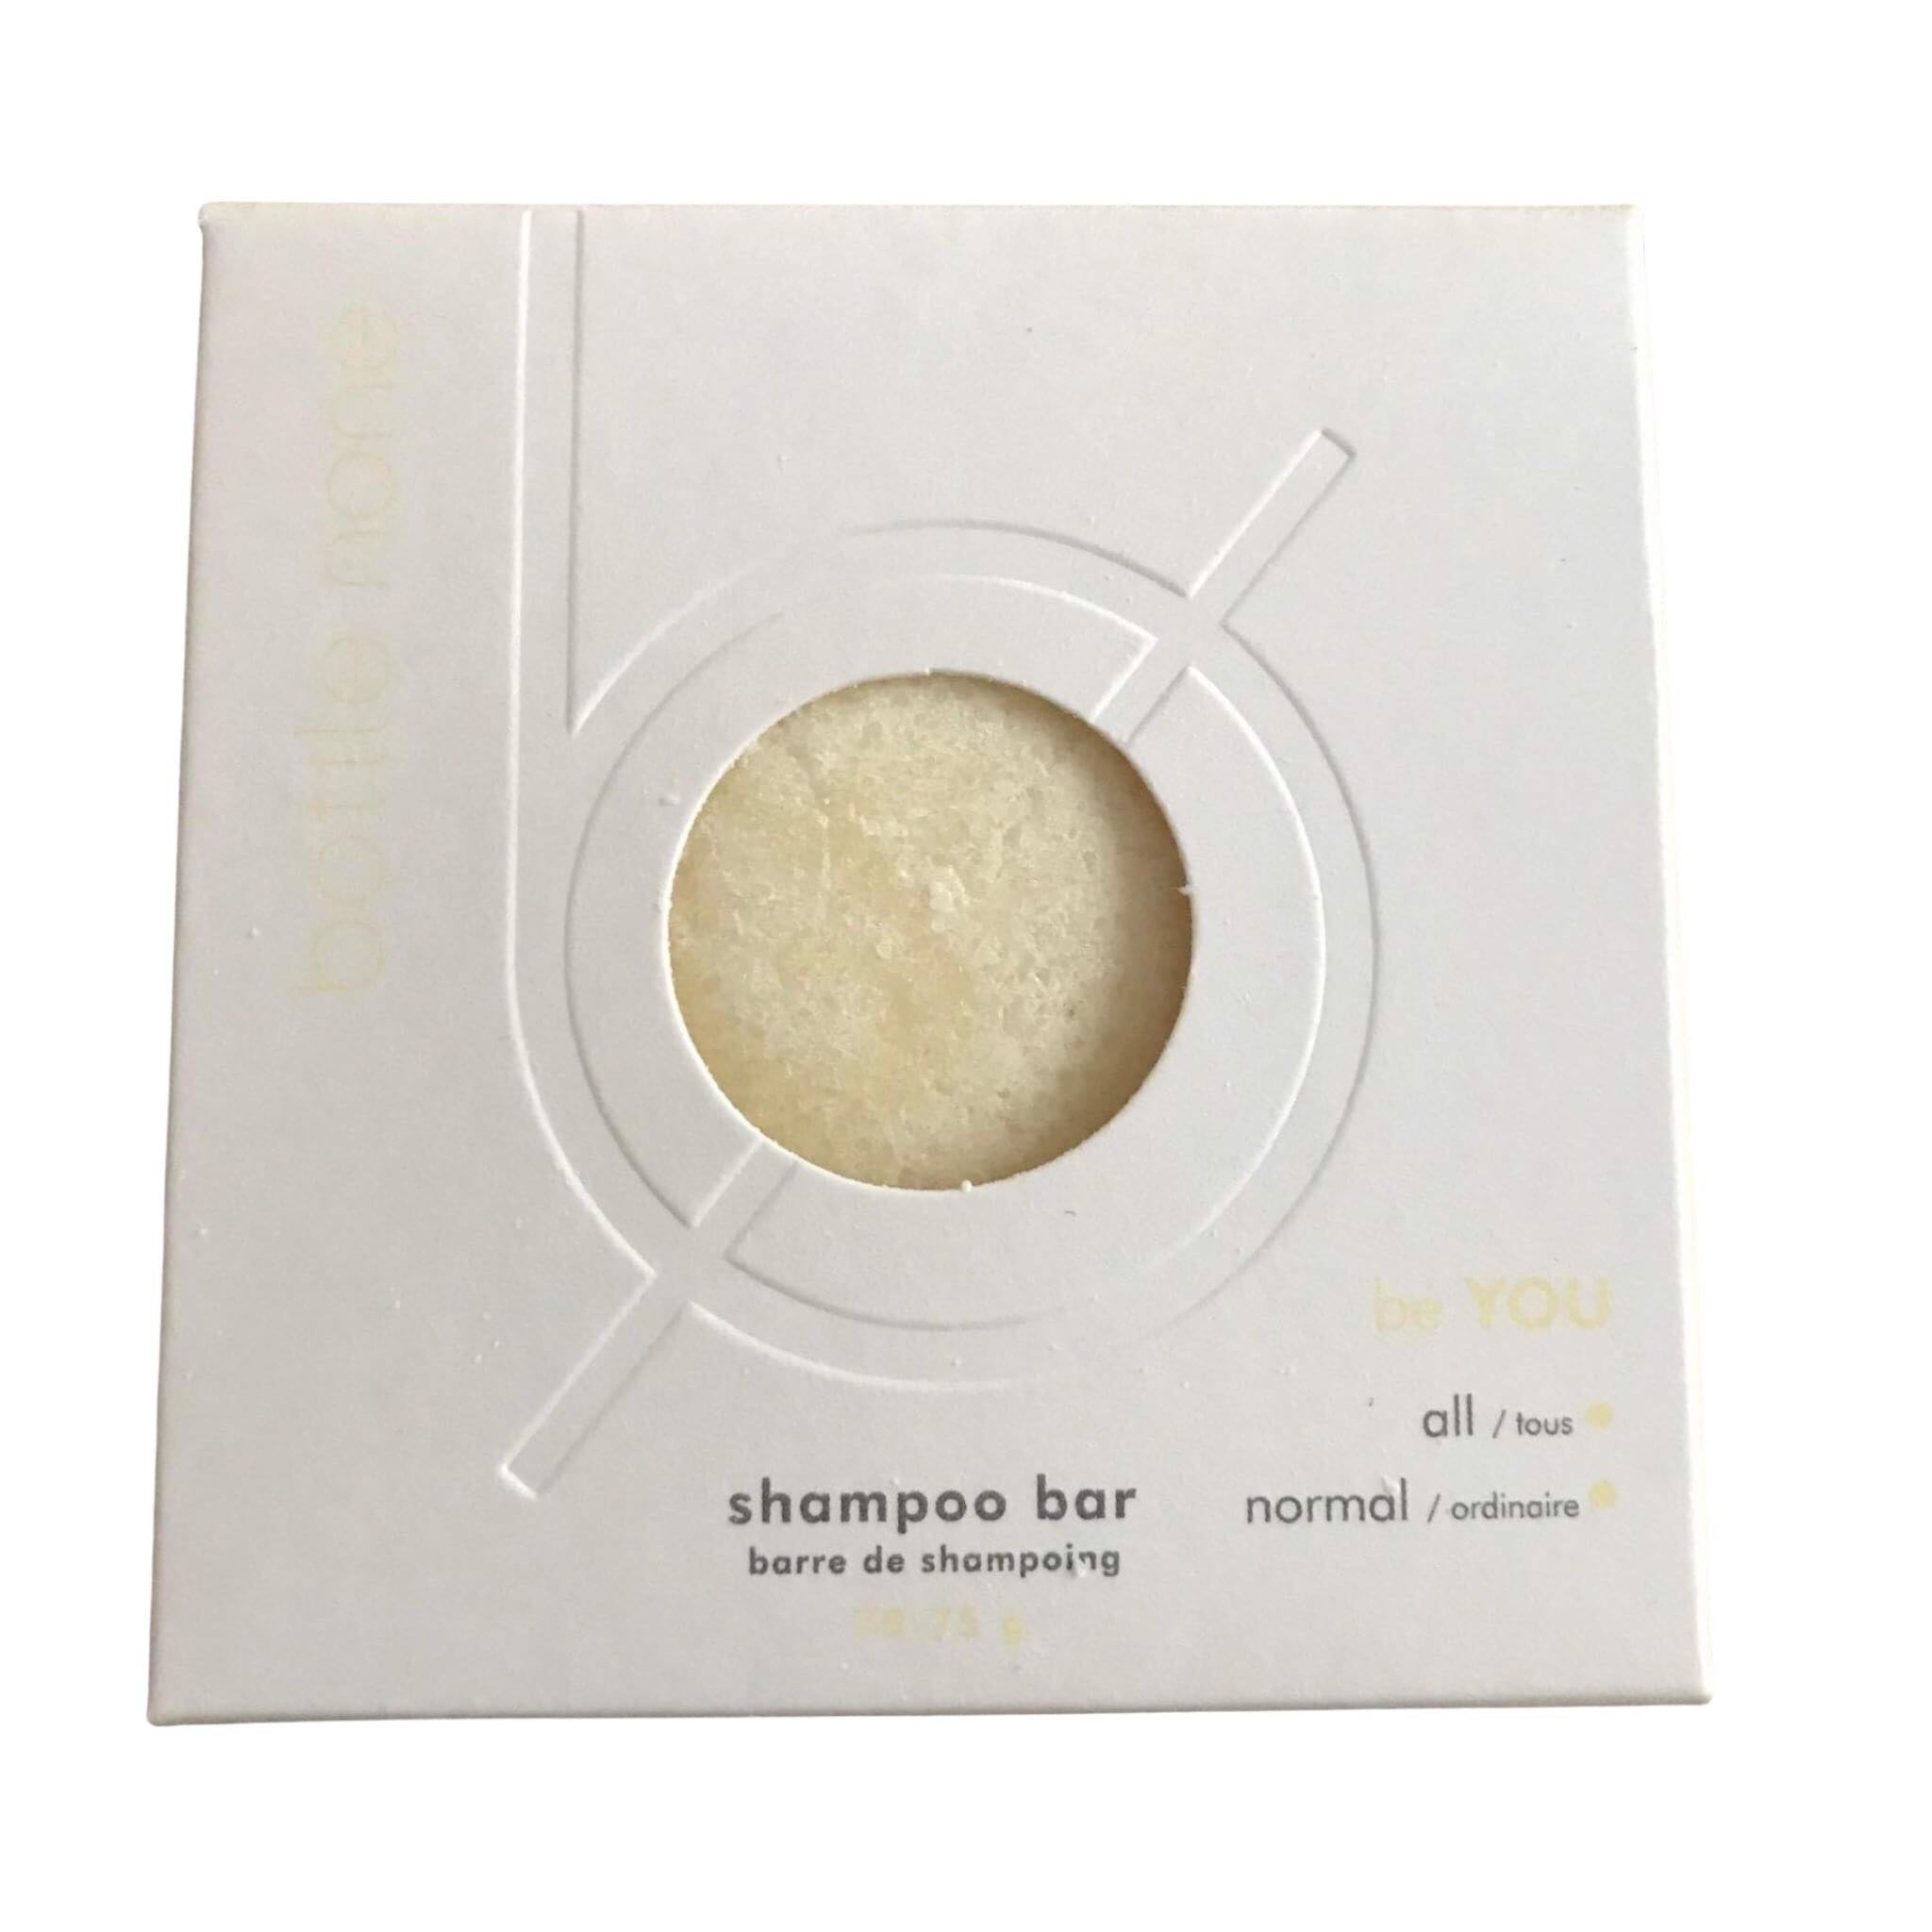 Be You shampoo bar in a box for normal all hair types made in Canada by Bottle None